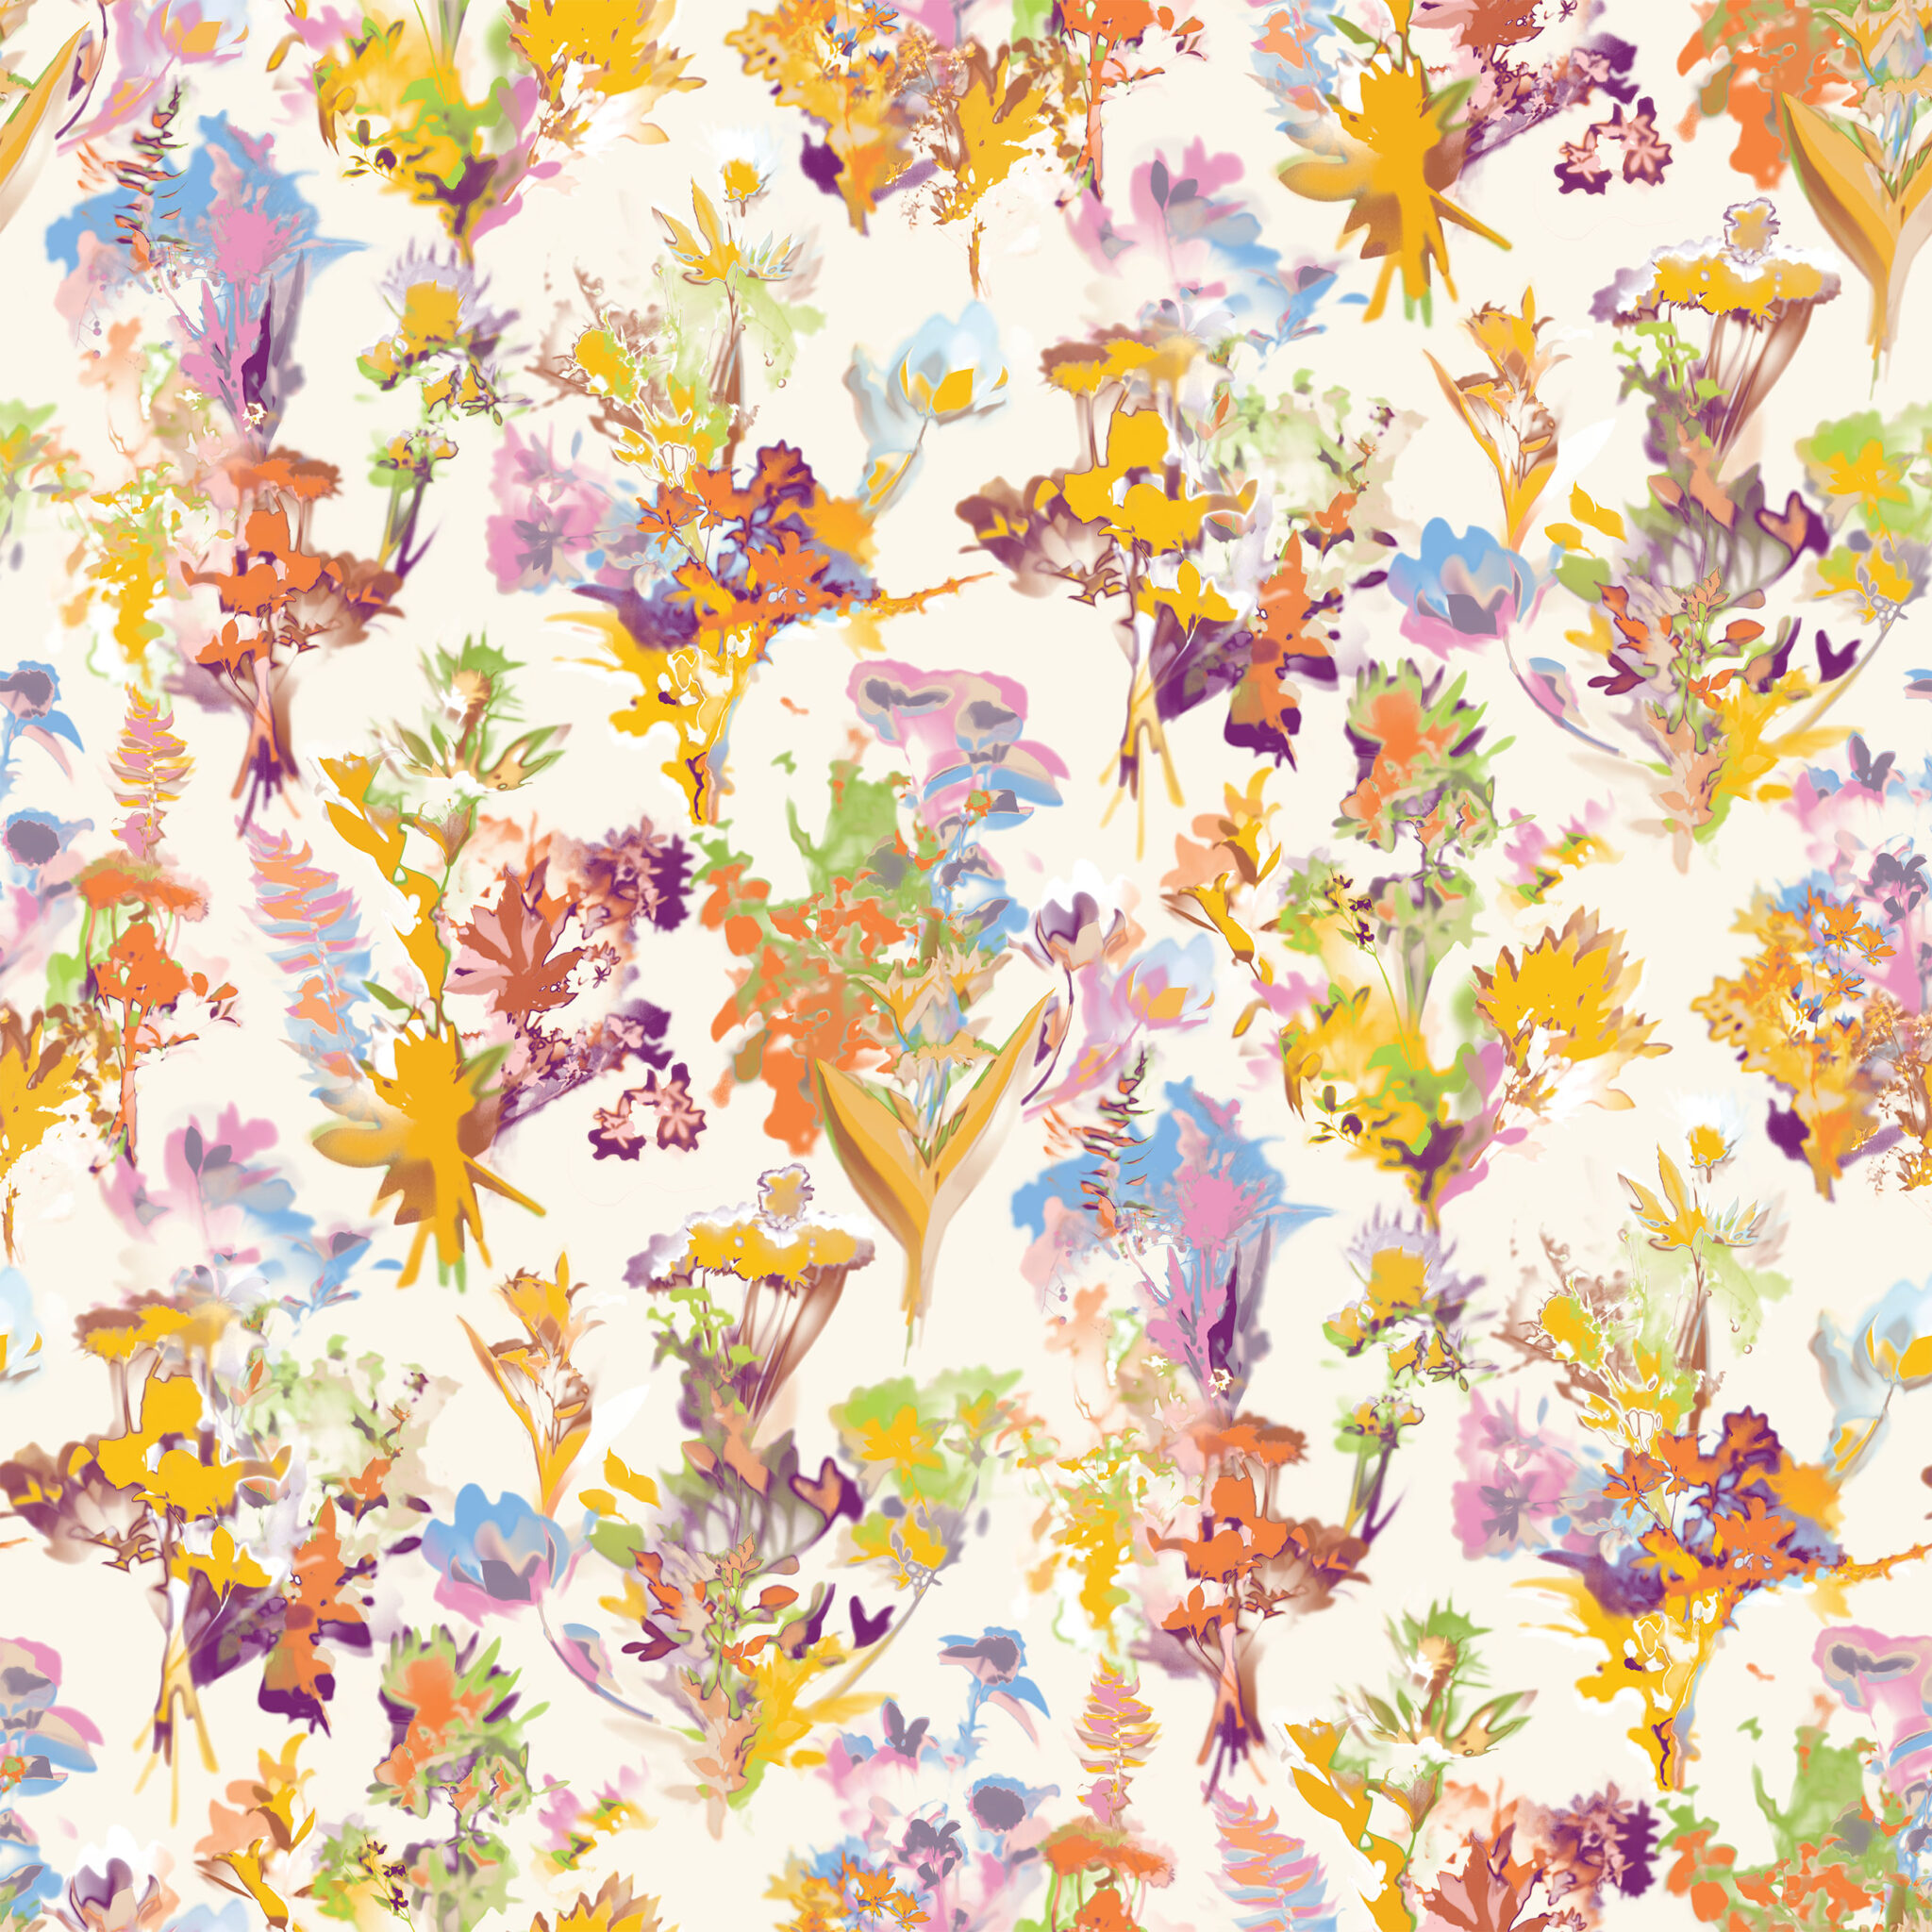 Bouquet, Large-scale floral pattern for upholstery and wallpaper.